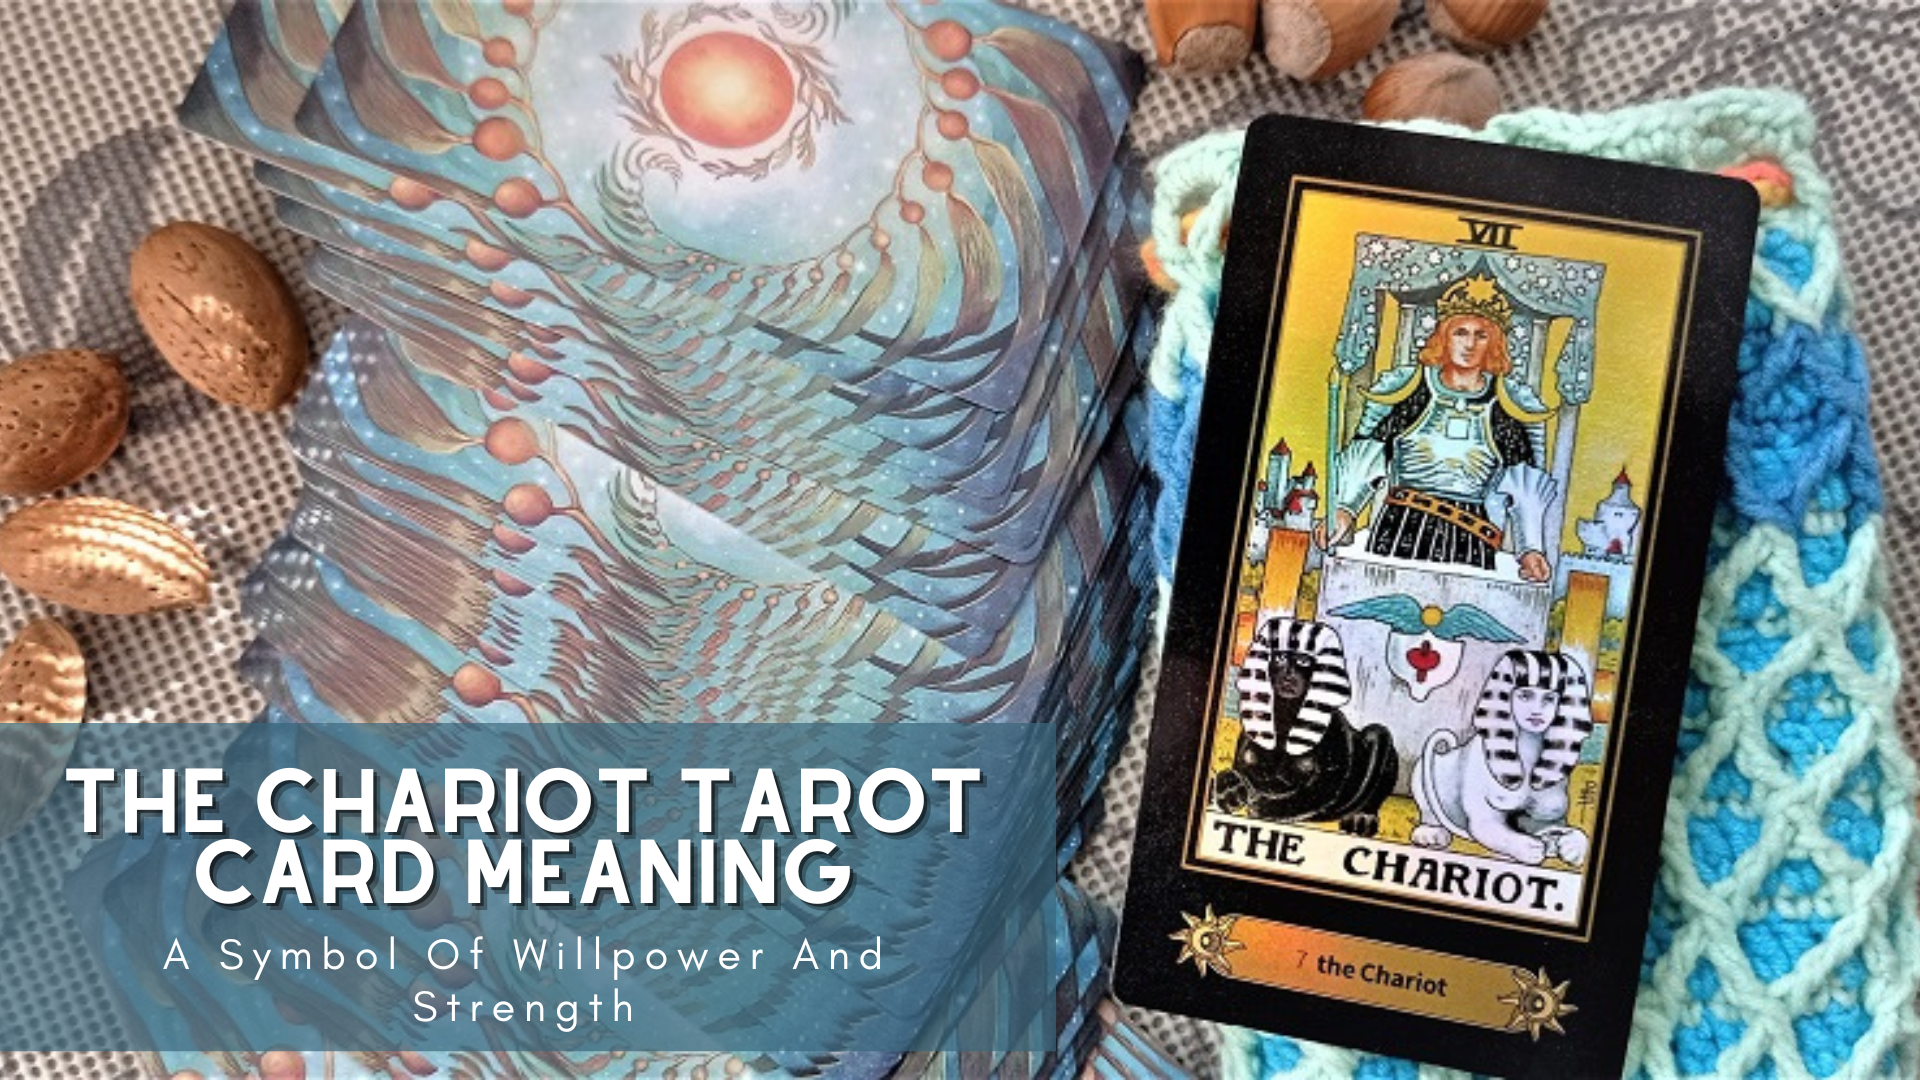 The Chariot Tarot Card Meaning - A Symbol Of Willpower And Strength